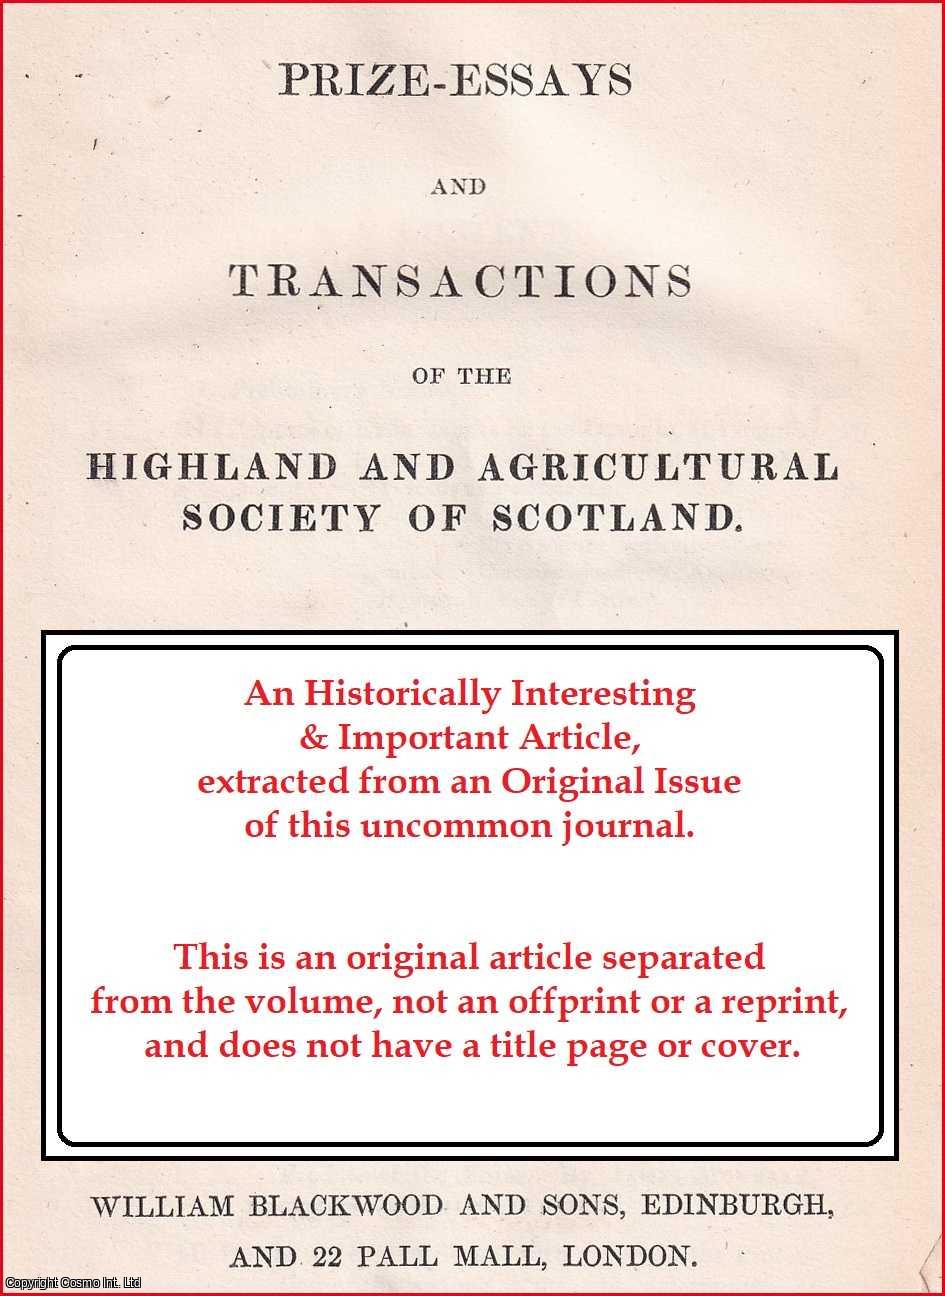 Mr. William Hogg, Shepherd, Parish of Stobo, Peeblesshire & others. - Plants Adapted for Winter Pasturage. An uncommon original article from the Prize Essays and Transactions of the Highland Society of Scotland, 1835.